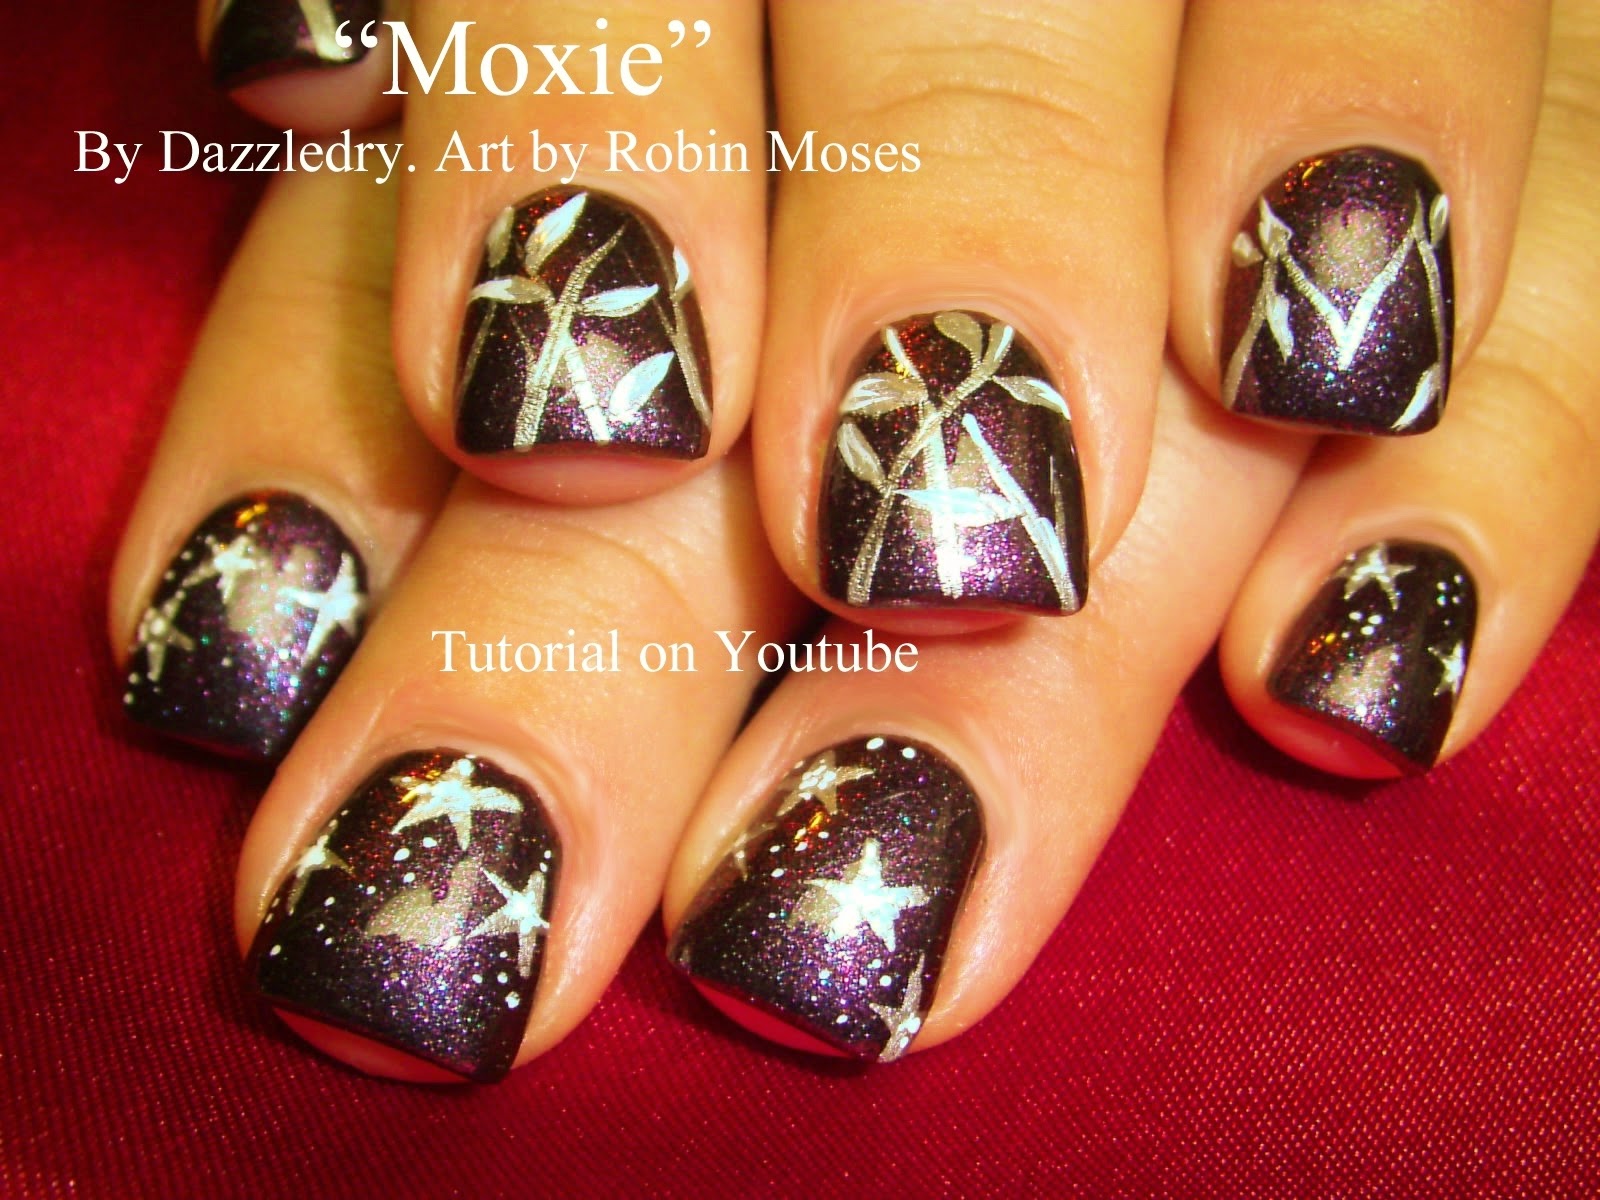 4. "Cozy Sweater Nail Design Tutorial" - wide 2